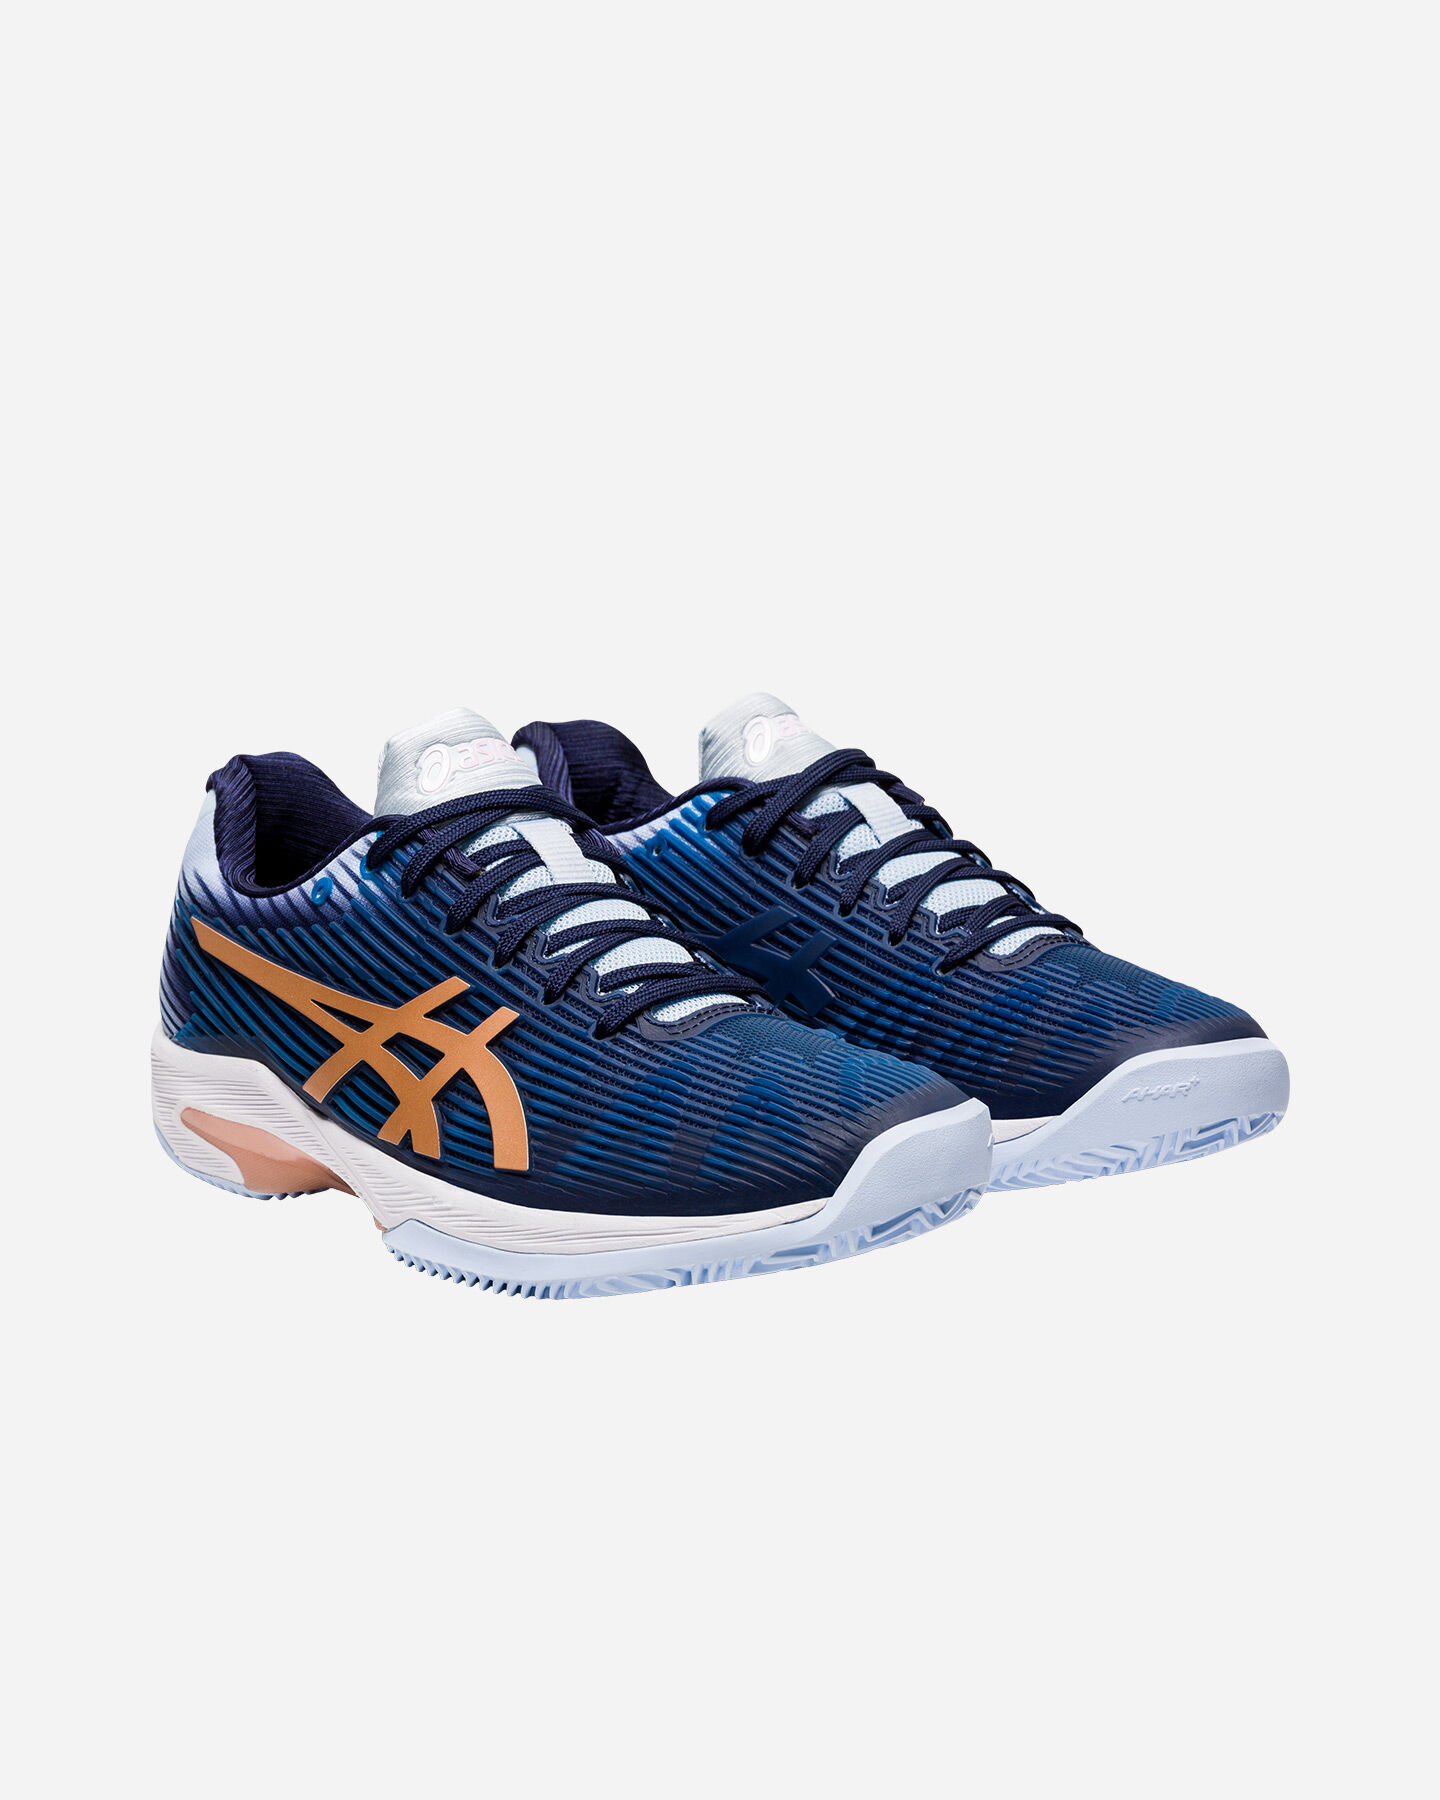  Scarpe tennis ASICS SOLUTION SPEED FF CLAY W S5159469|413|5 scatto 1